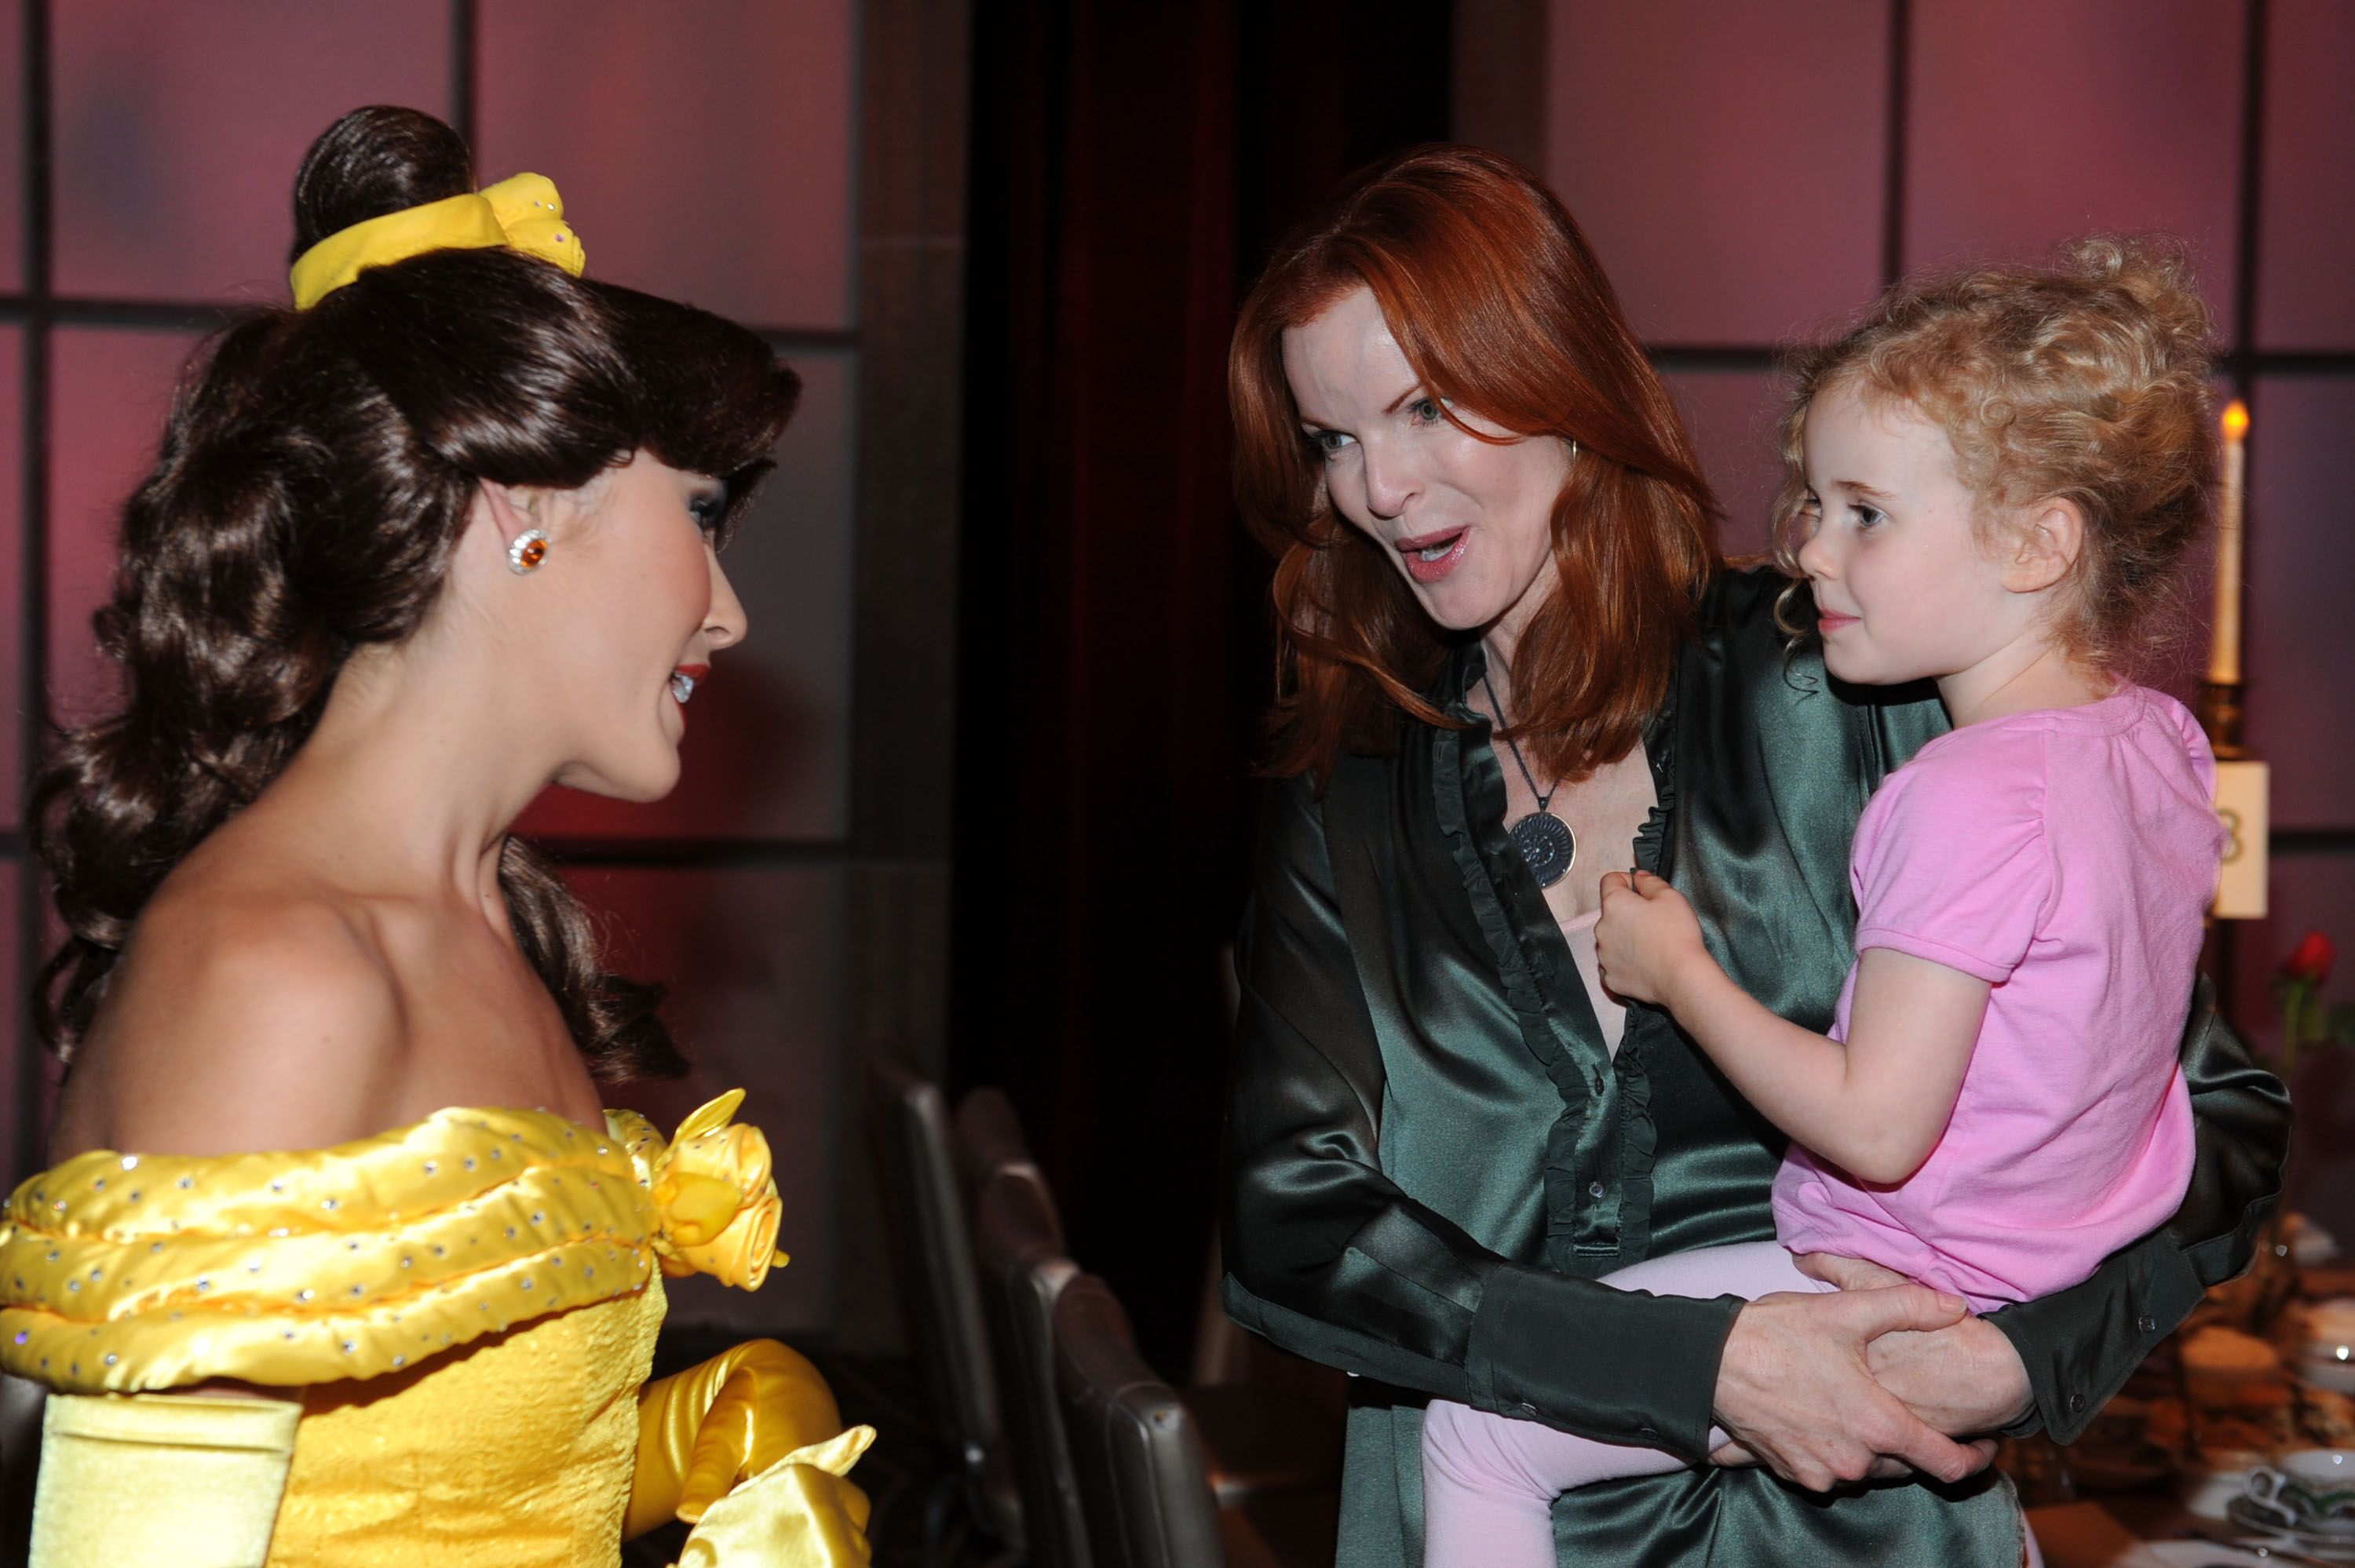 Marcia Cross and daughter Eden Mahoney attend the "Beauty and the Beast" Sing-A-Long DVD premiere after Tea Party held at the Hollywood and Highland Ballroom on October 2, 2010 in Los Angeles, California. | Source: Getty Images